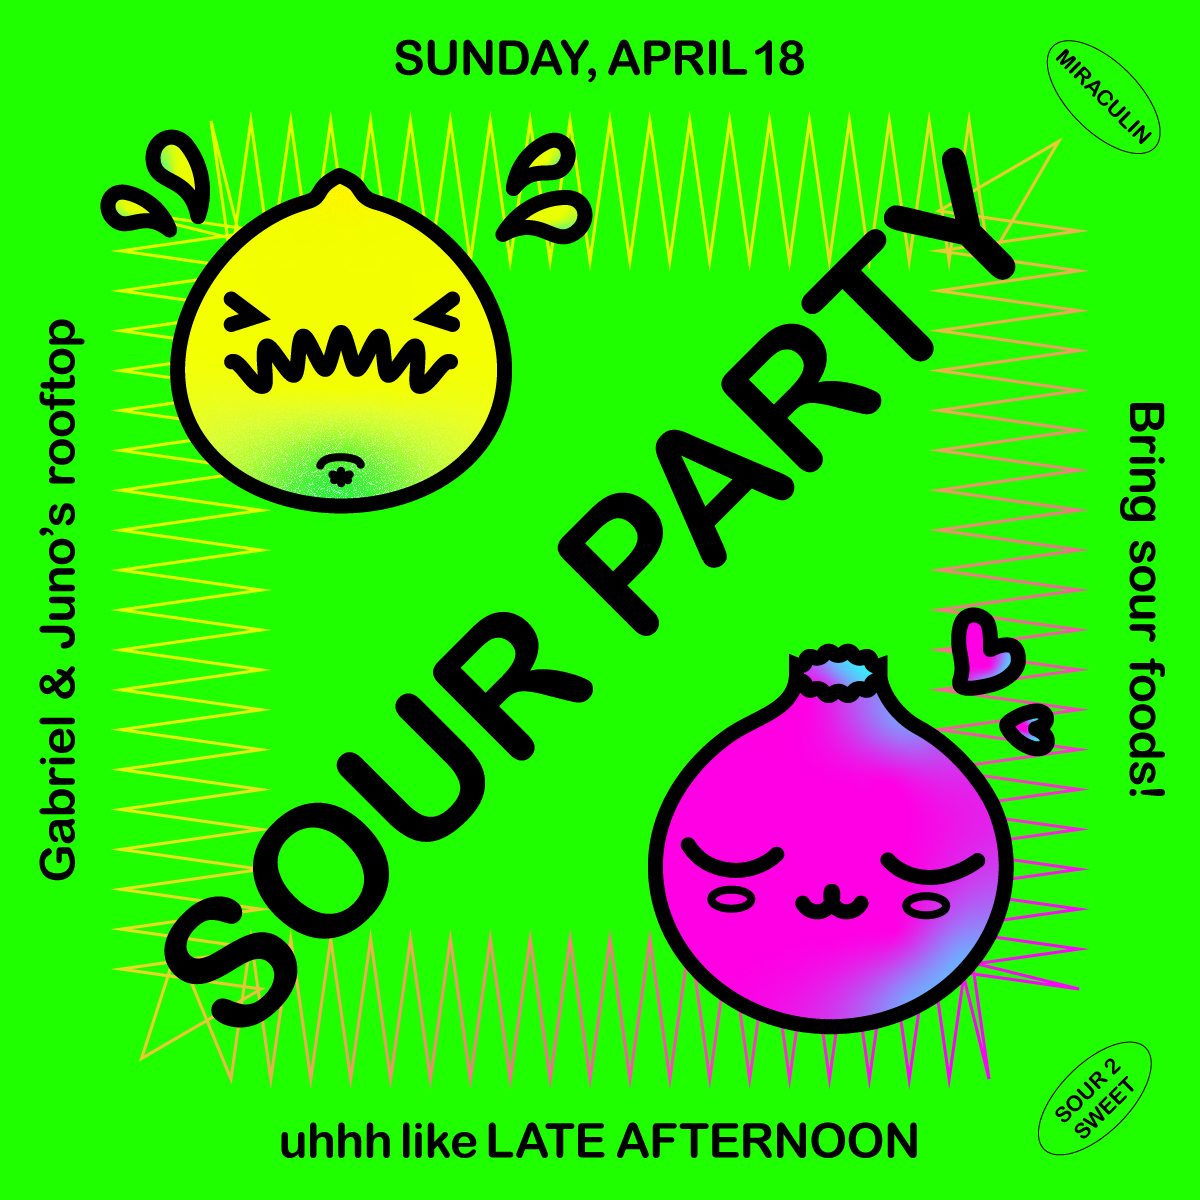 A neon green square with rounded sans serif text saying 'SOUR PARTY' diagonally across the image and smaller text with event details along each edge. Above and below, in a fat line weight, are drawings of a lemon with a puckered-up face and a calm-looking magenta berry.